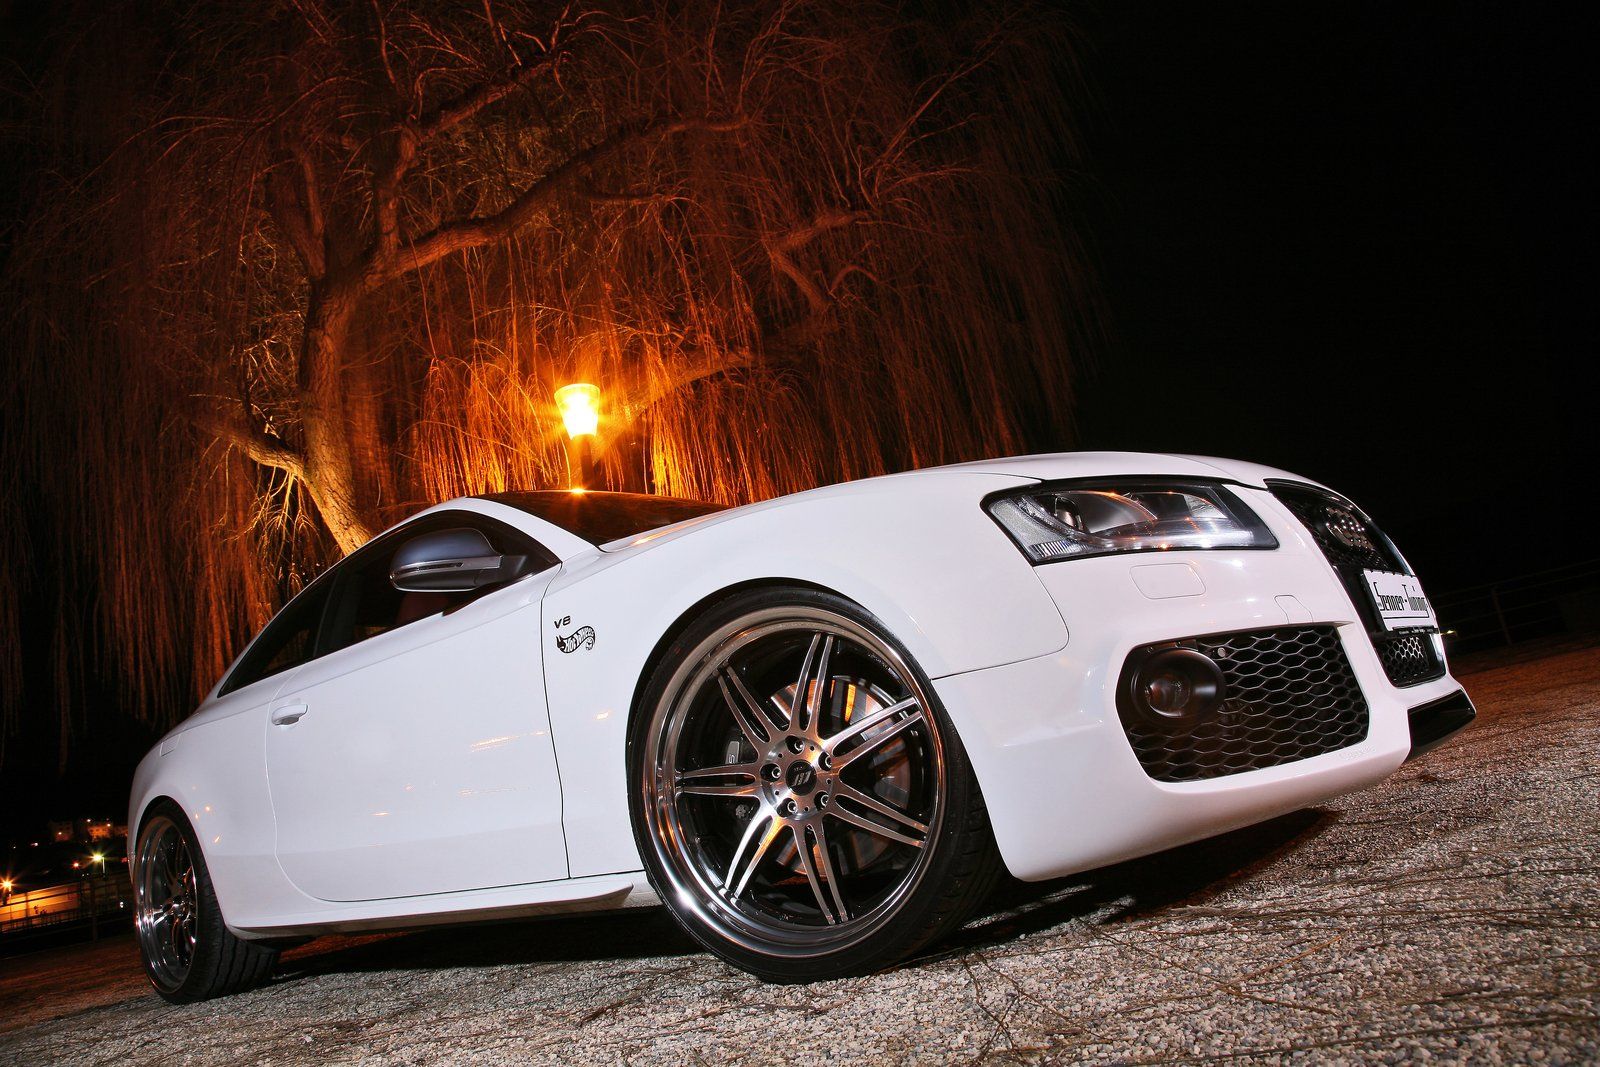 Audi S5 by Senner Tuning